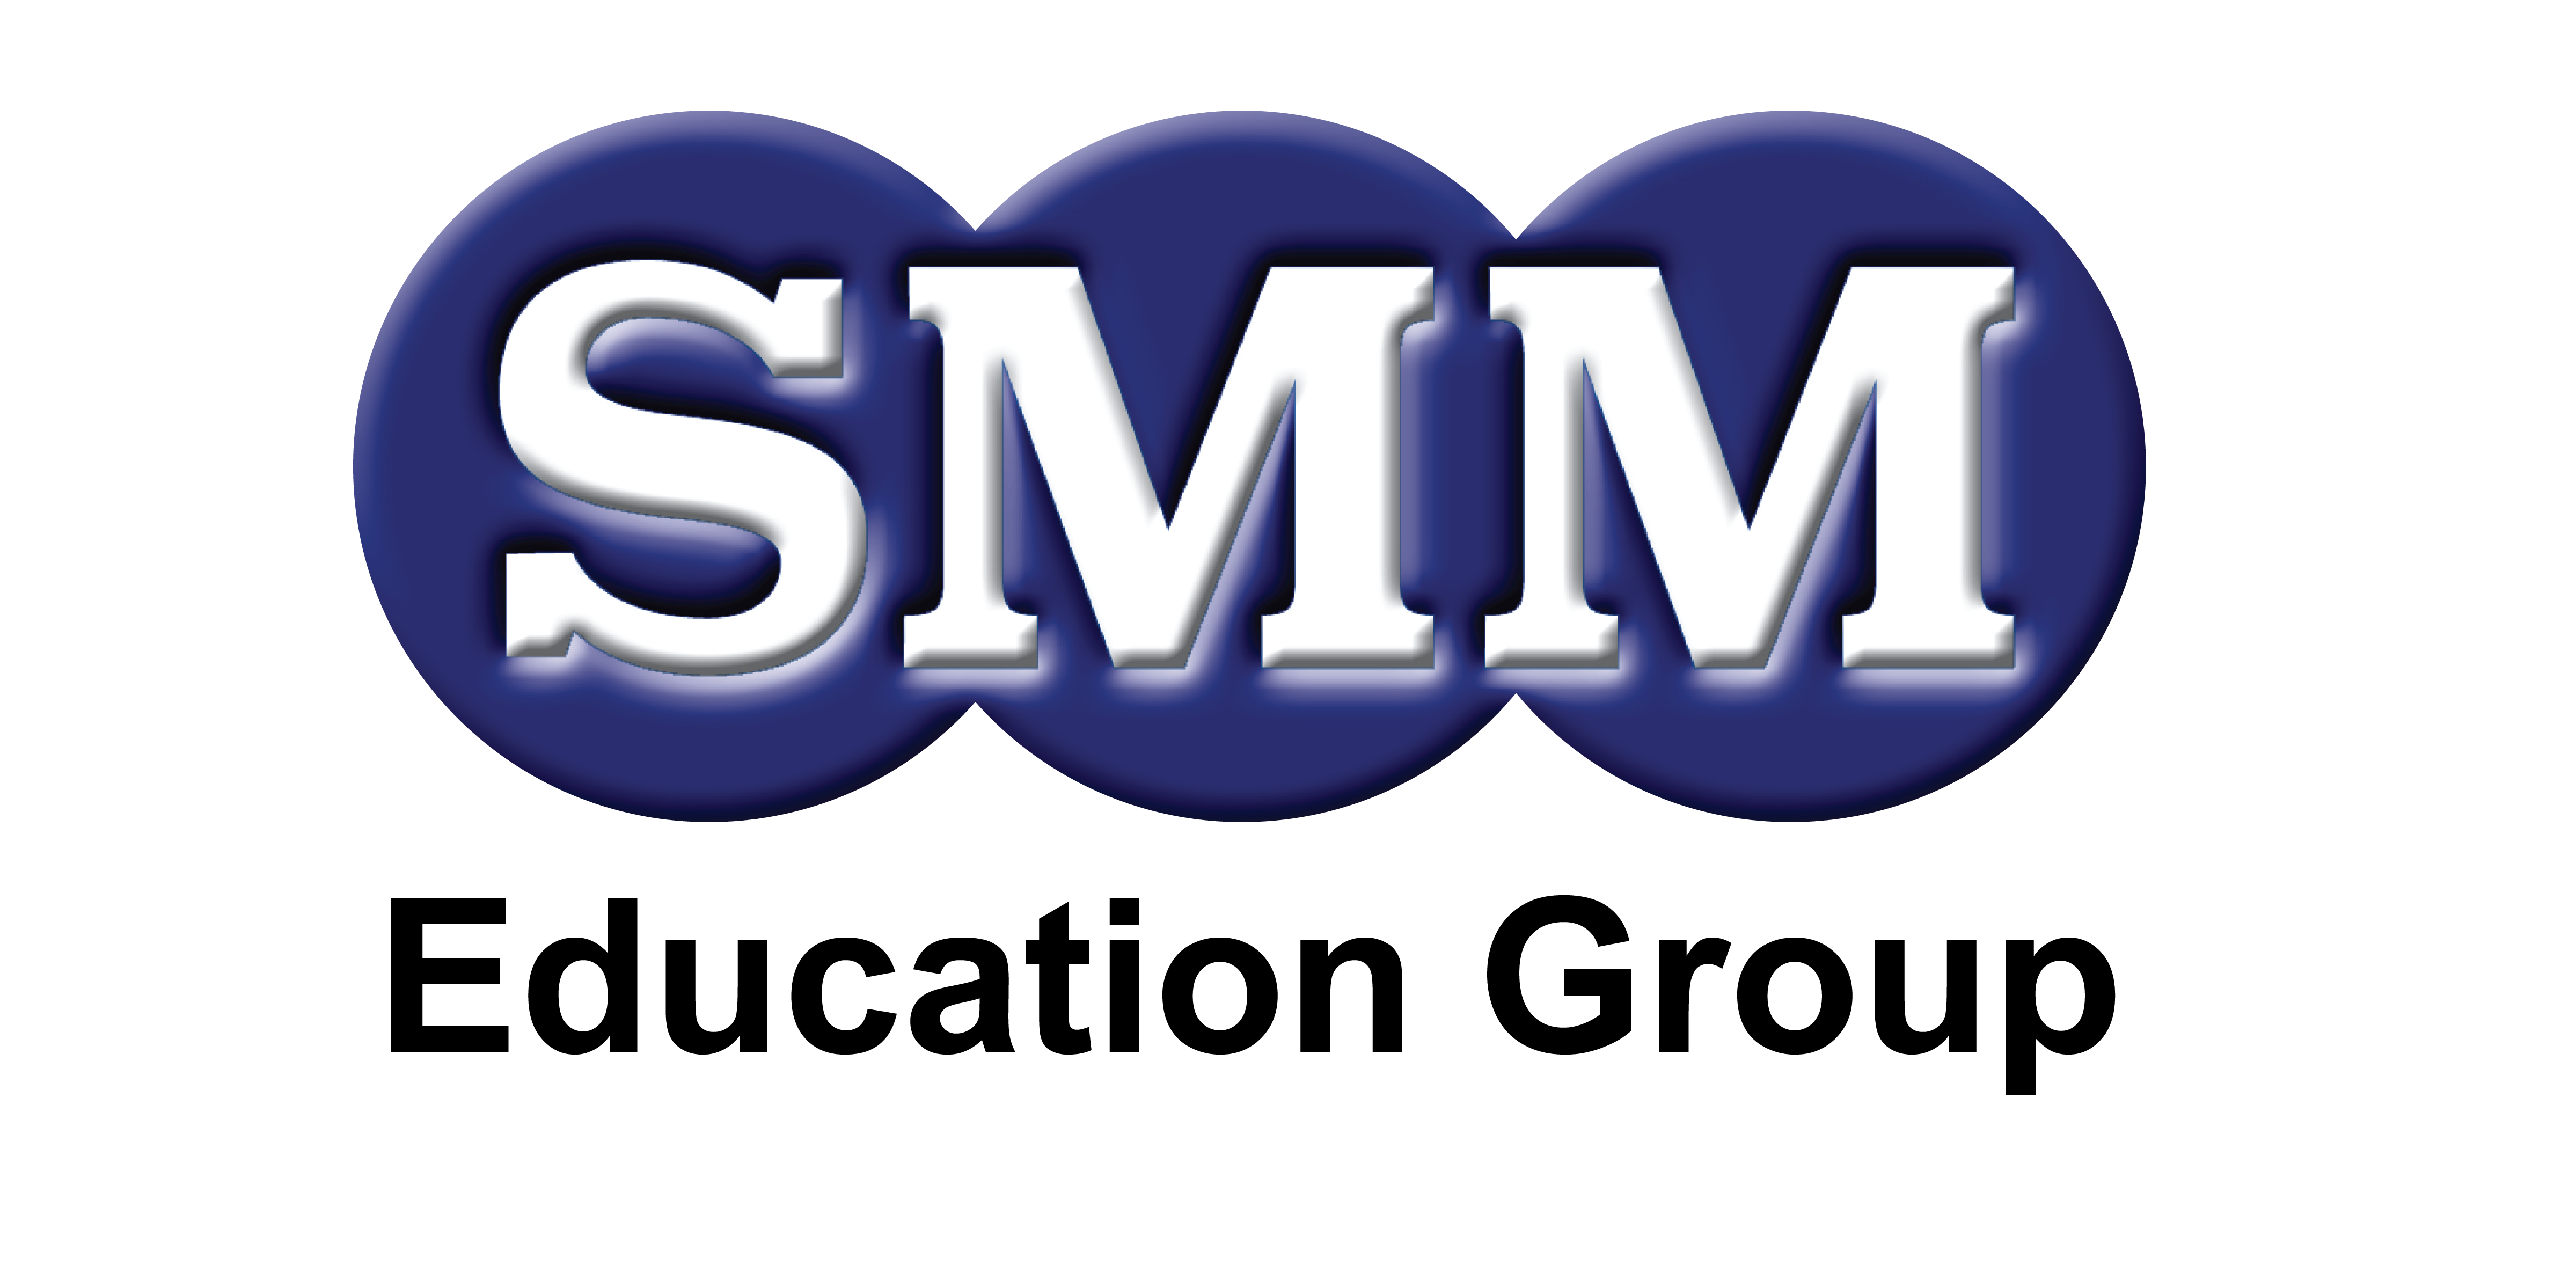 SMM Education Group